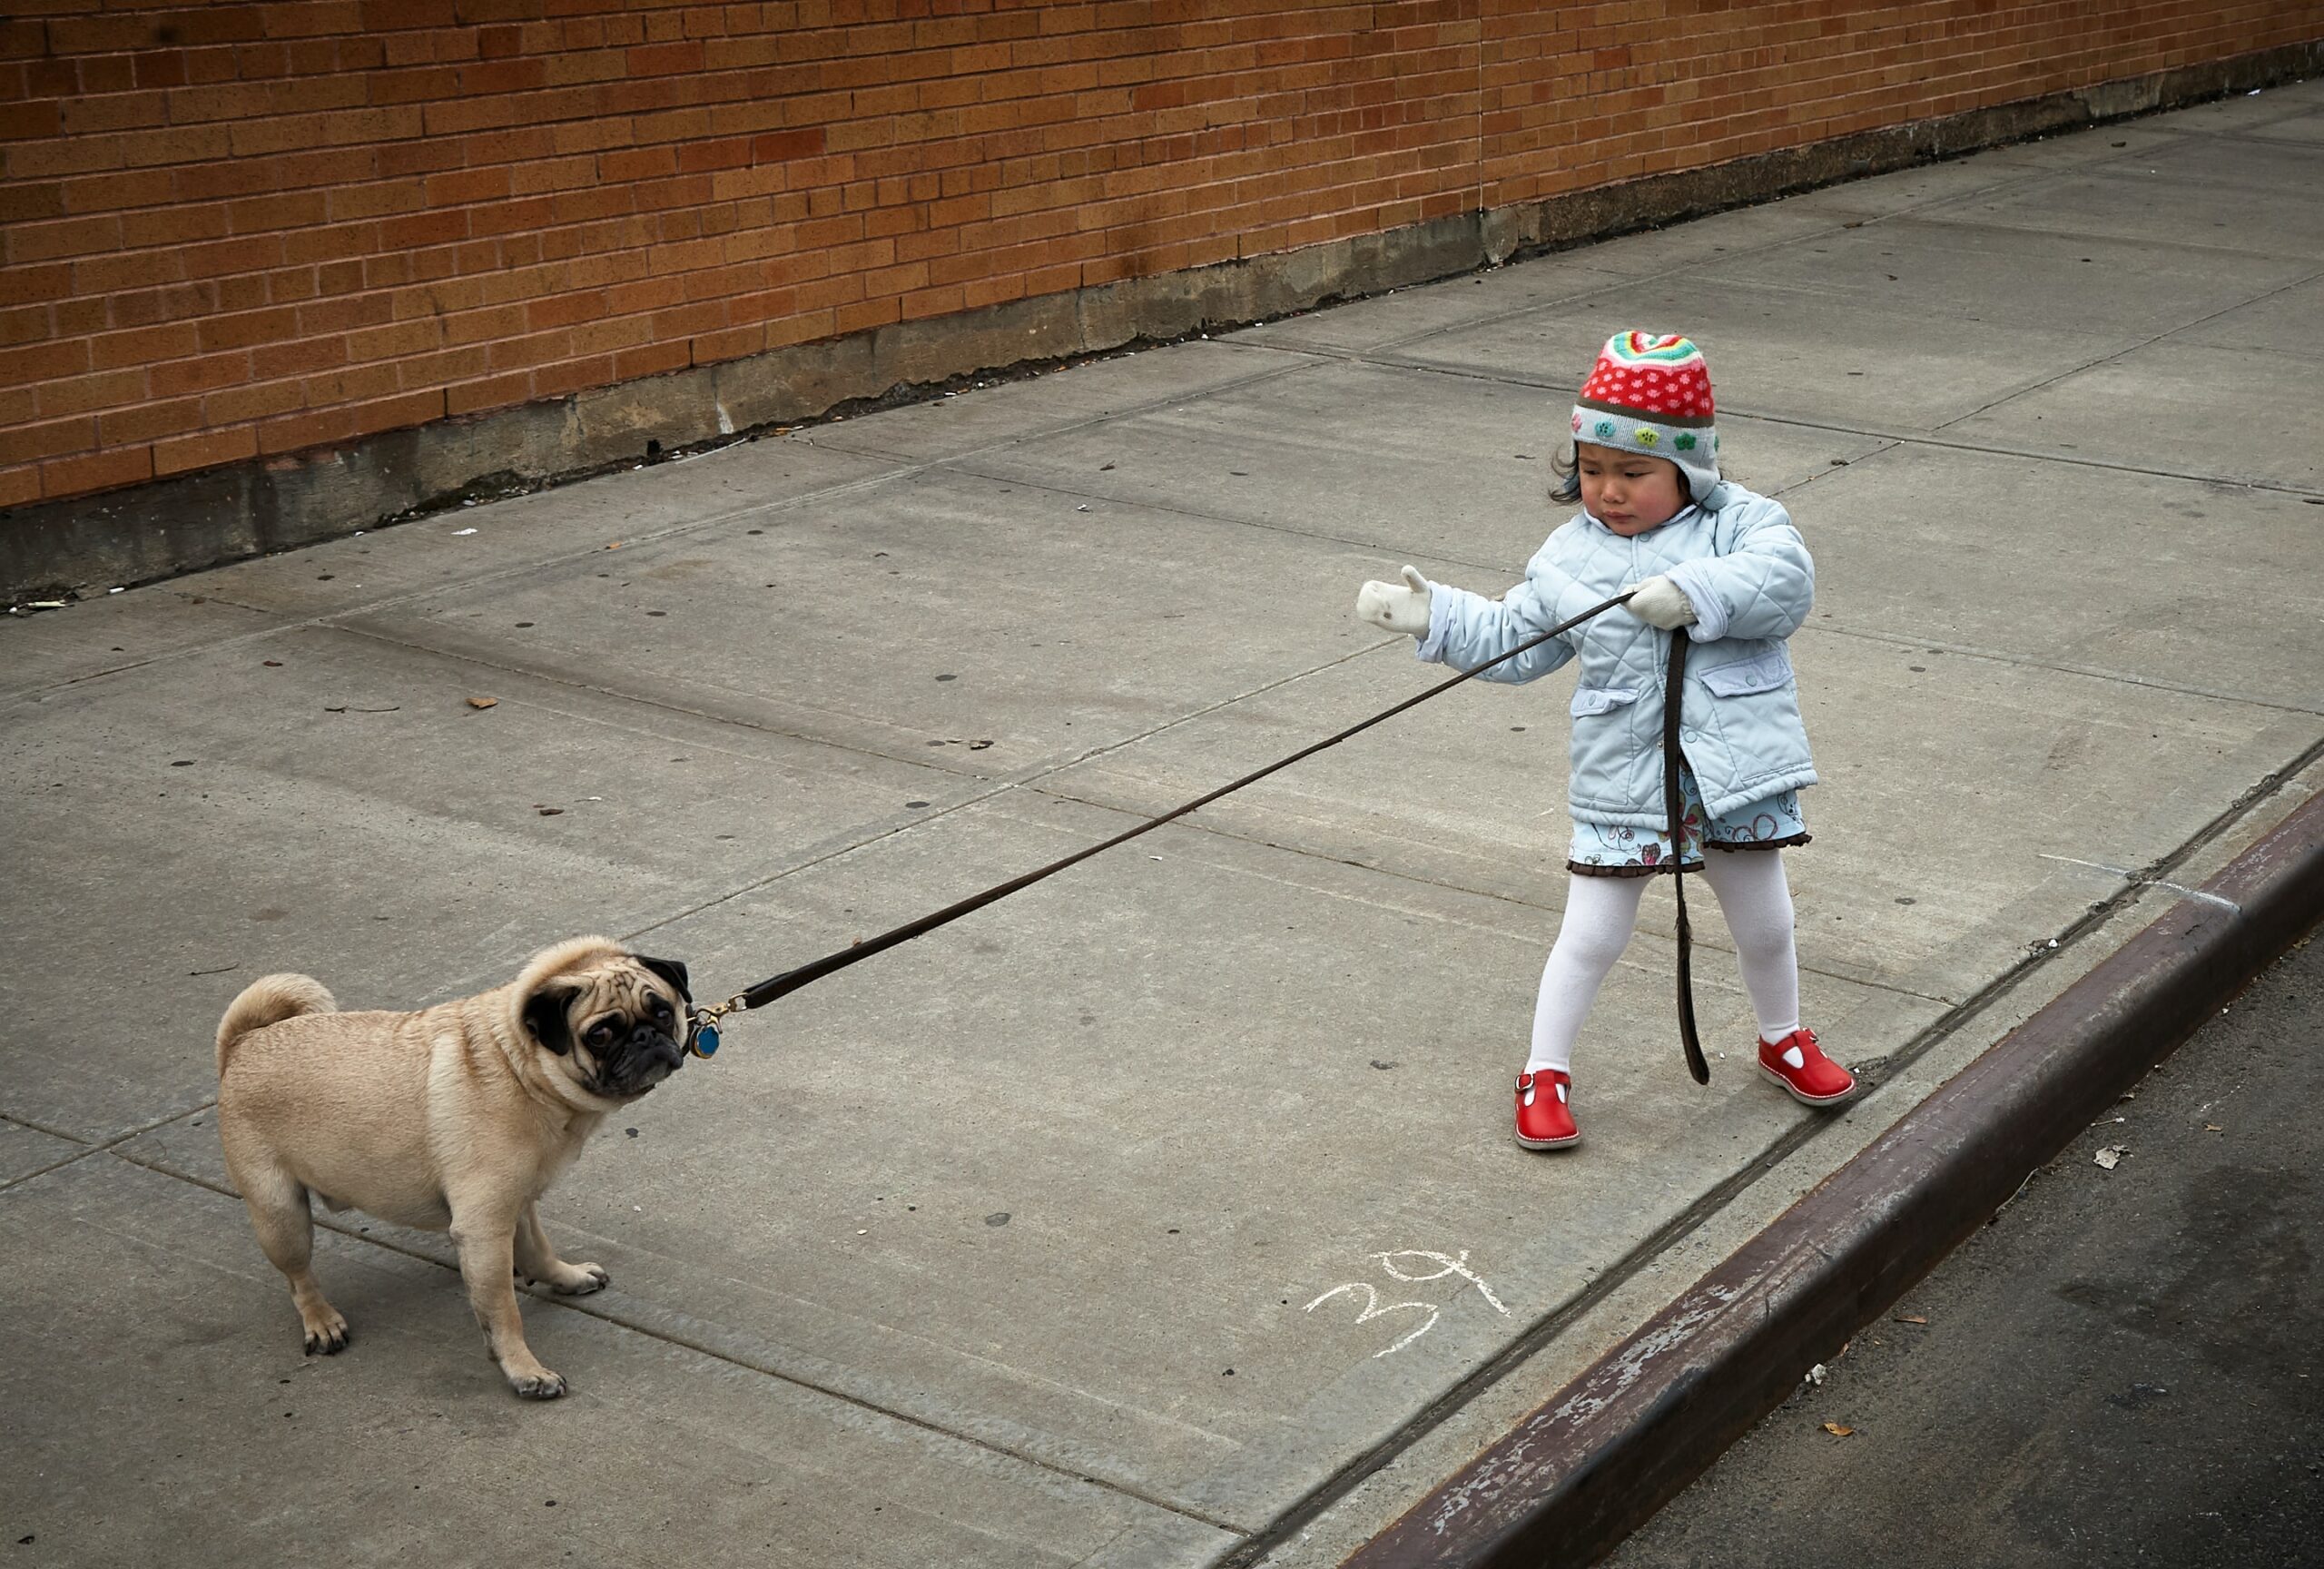 Kid pulling the dog with a leash